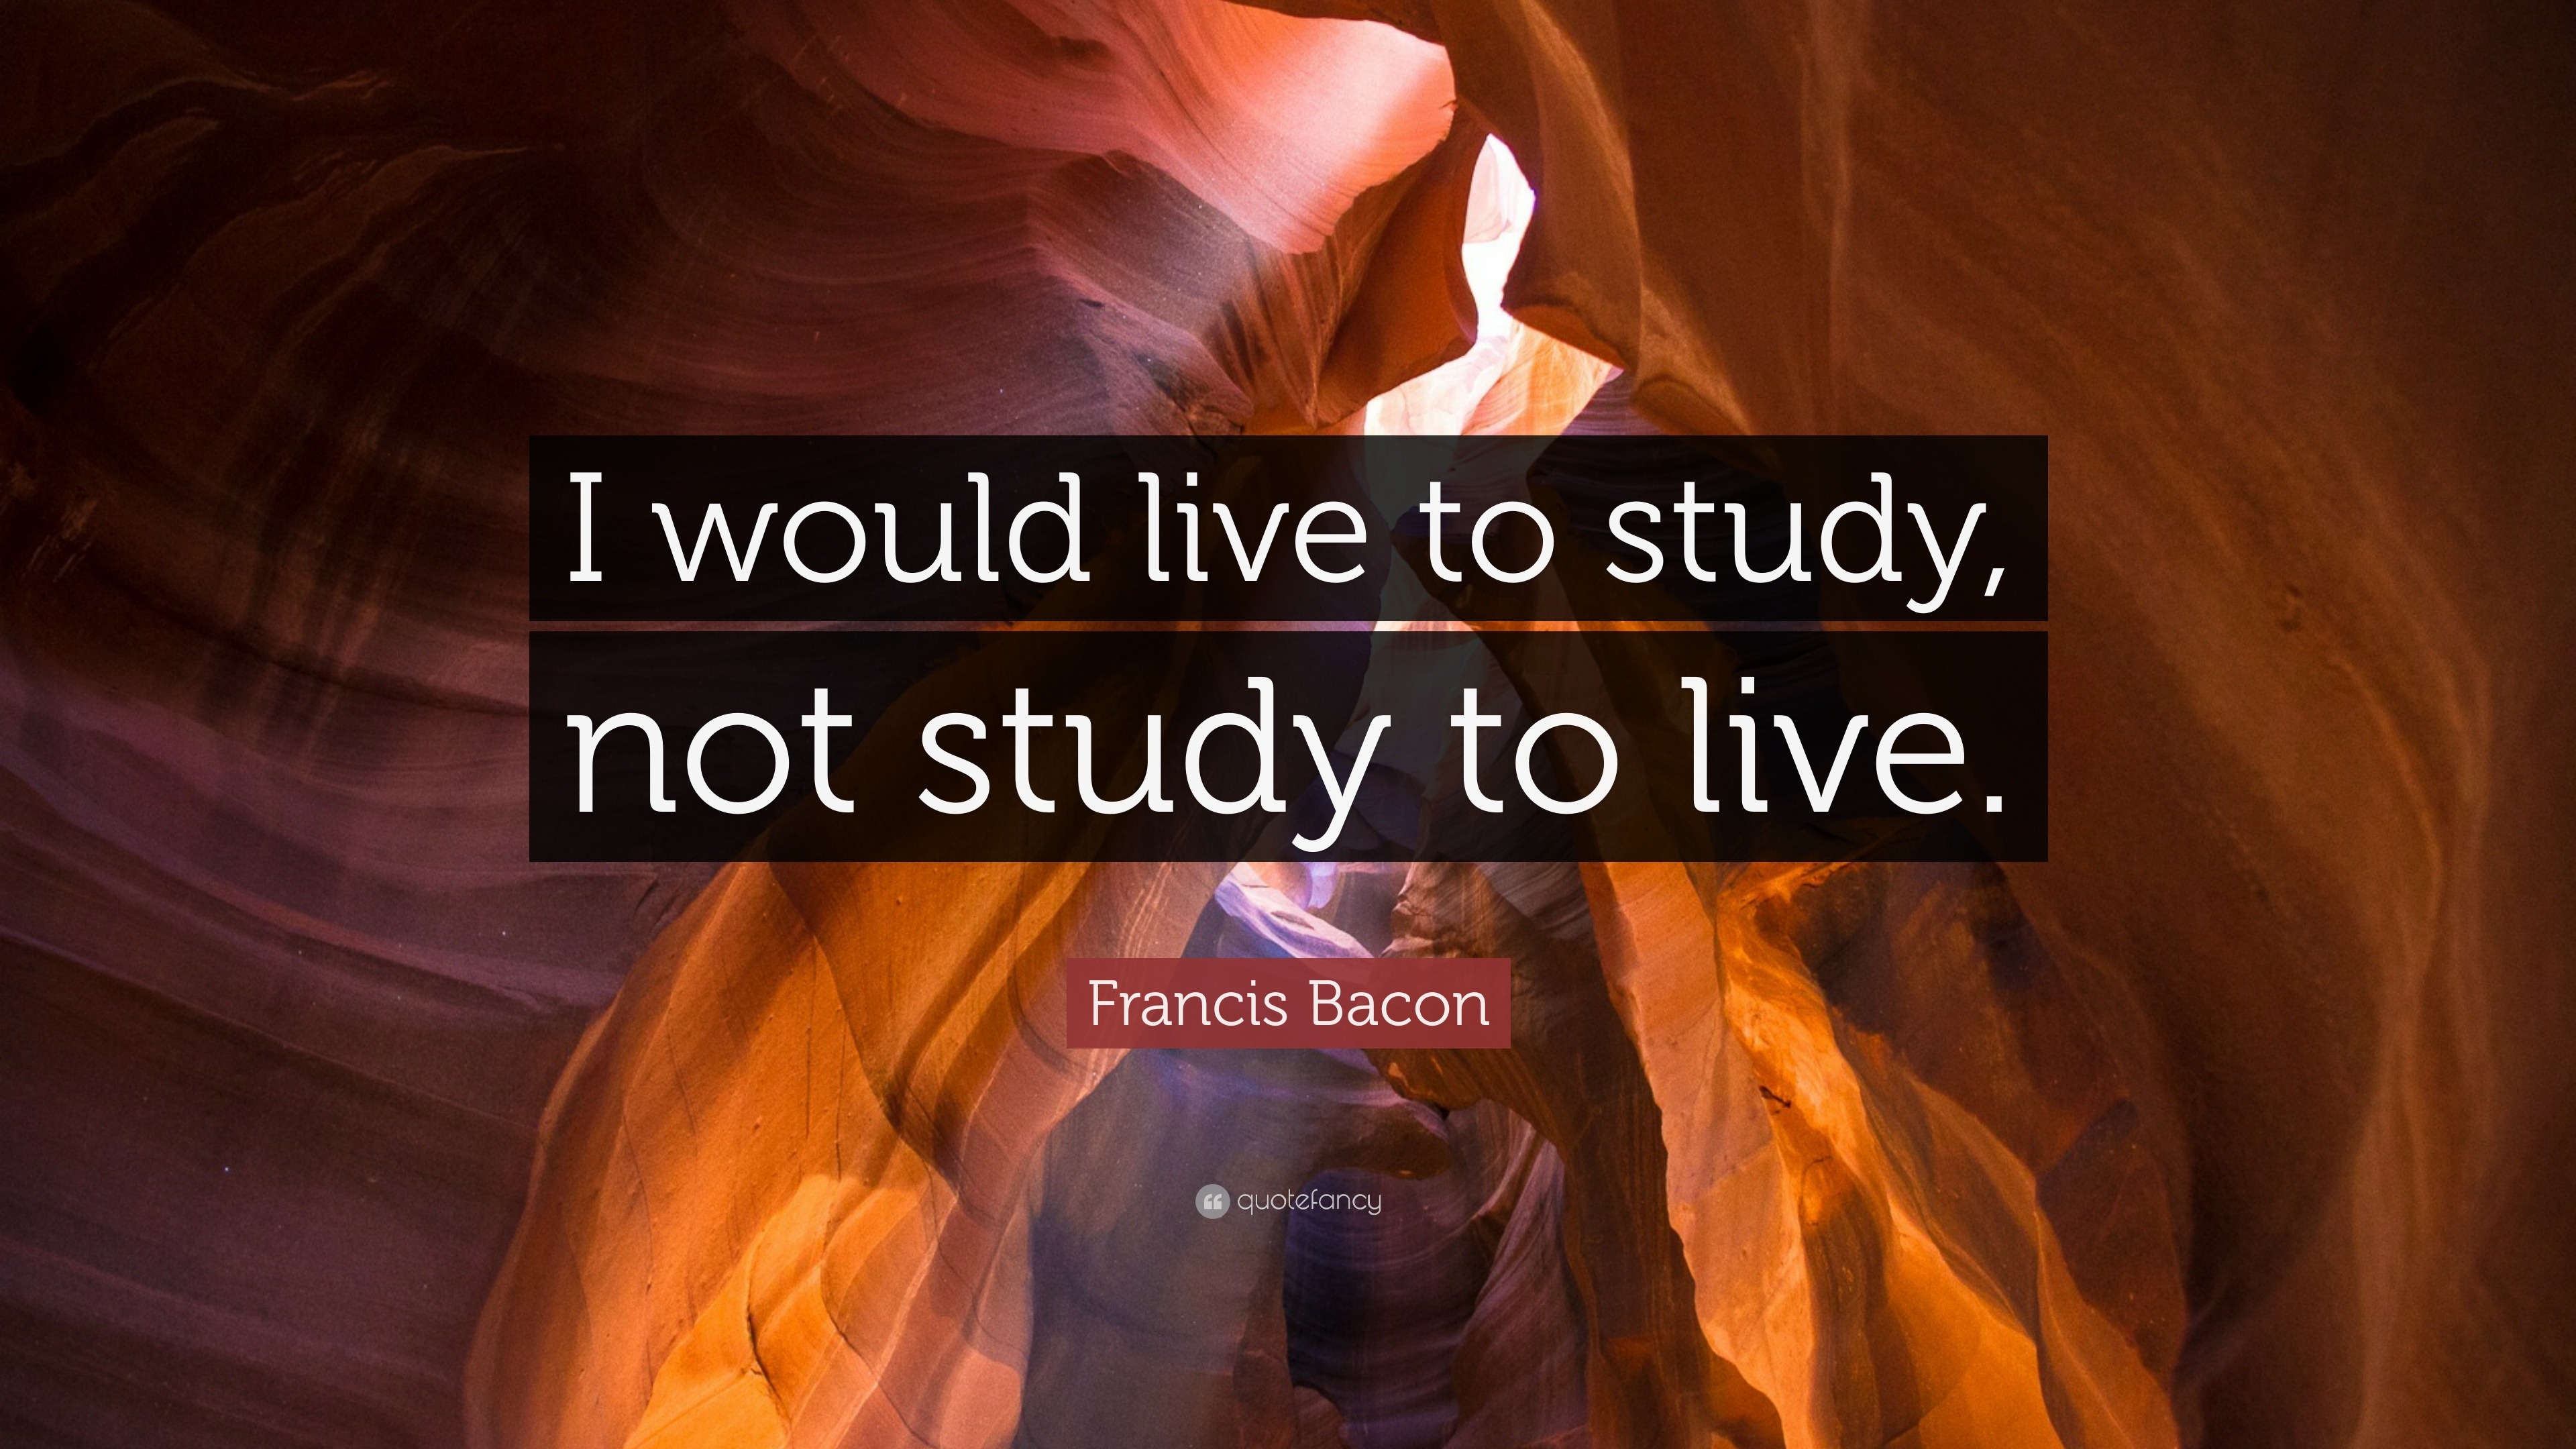 Study Quotes (40 wallpapers) - Quotefancy